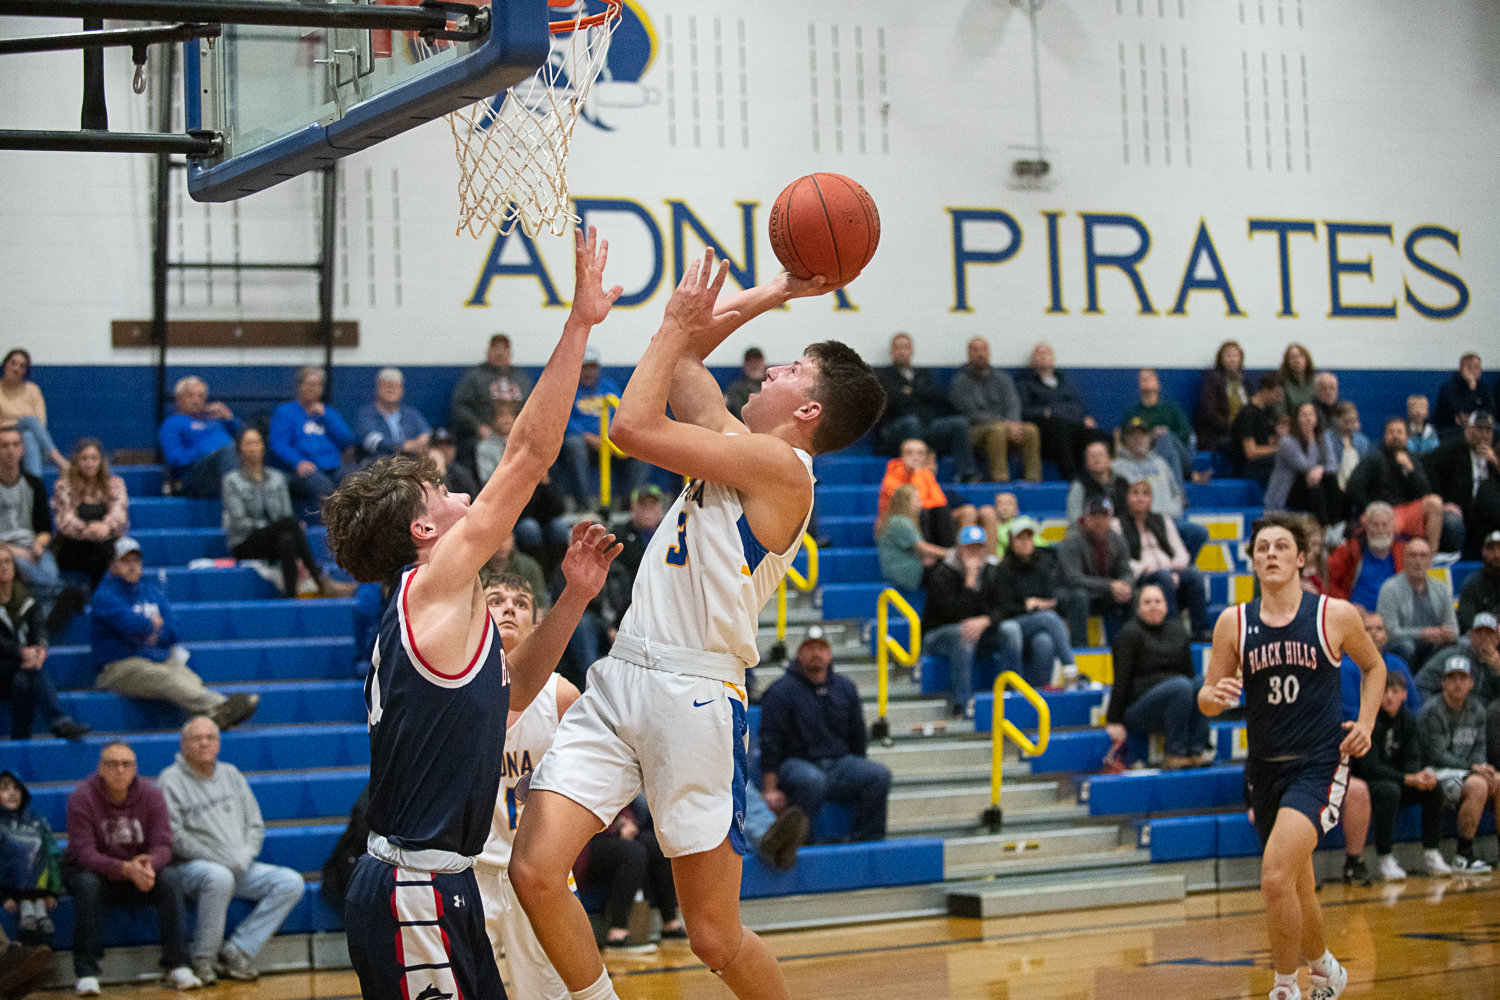 Braeden Salme puts up a shot through contact during Adna's 67-60 win over Black Hills to open the season on Nov. 29.